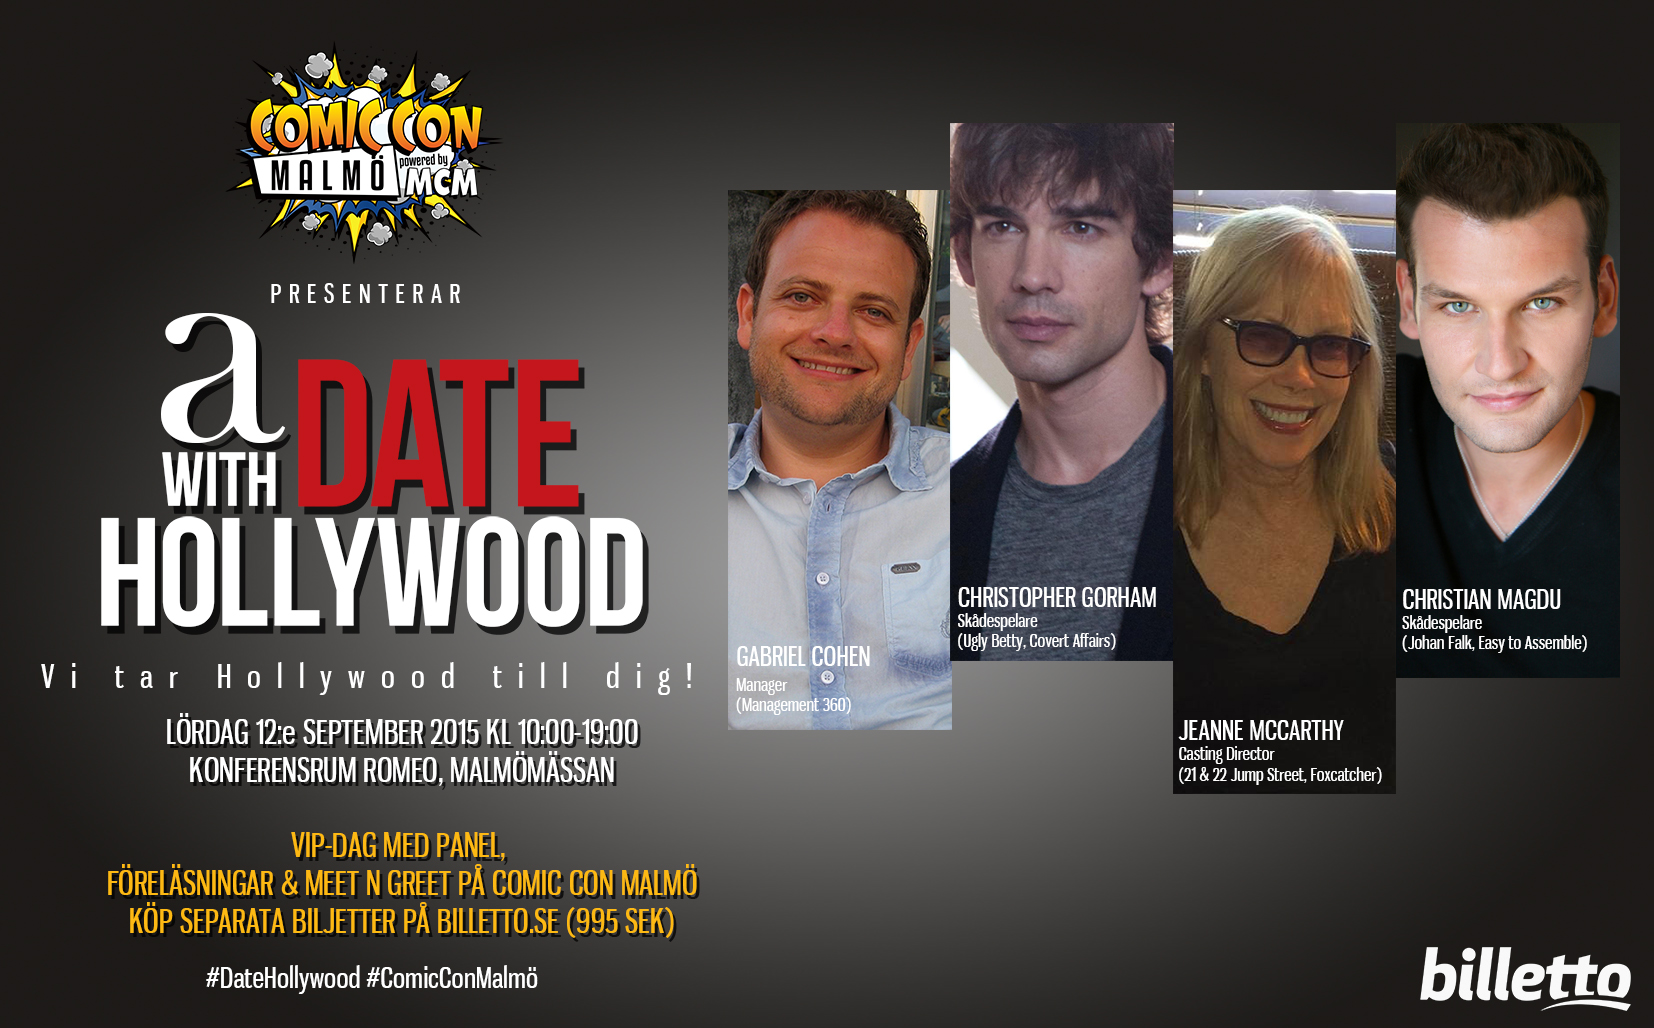 Comic Con Sweden (Malmö) 2015 with guests Gabriel Cohen (Management 360), actor Christopher Gorham, casting director Jeanne McCarthy and actor Christian Magdu